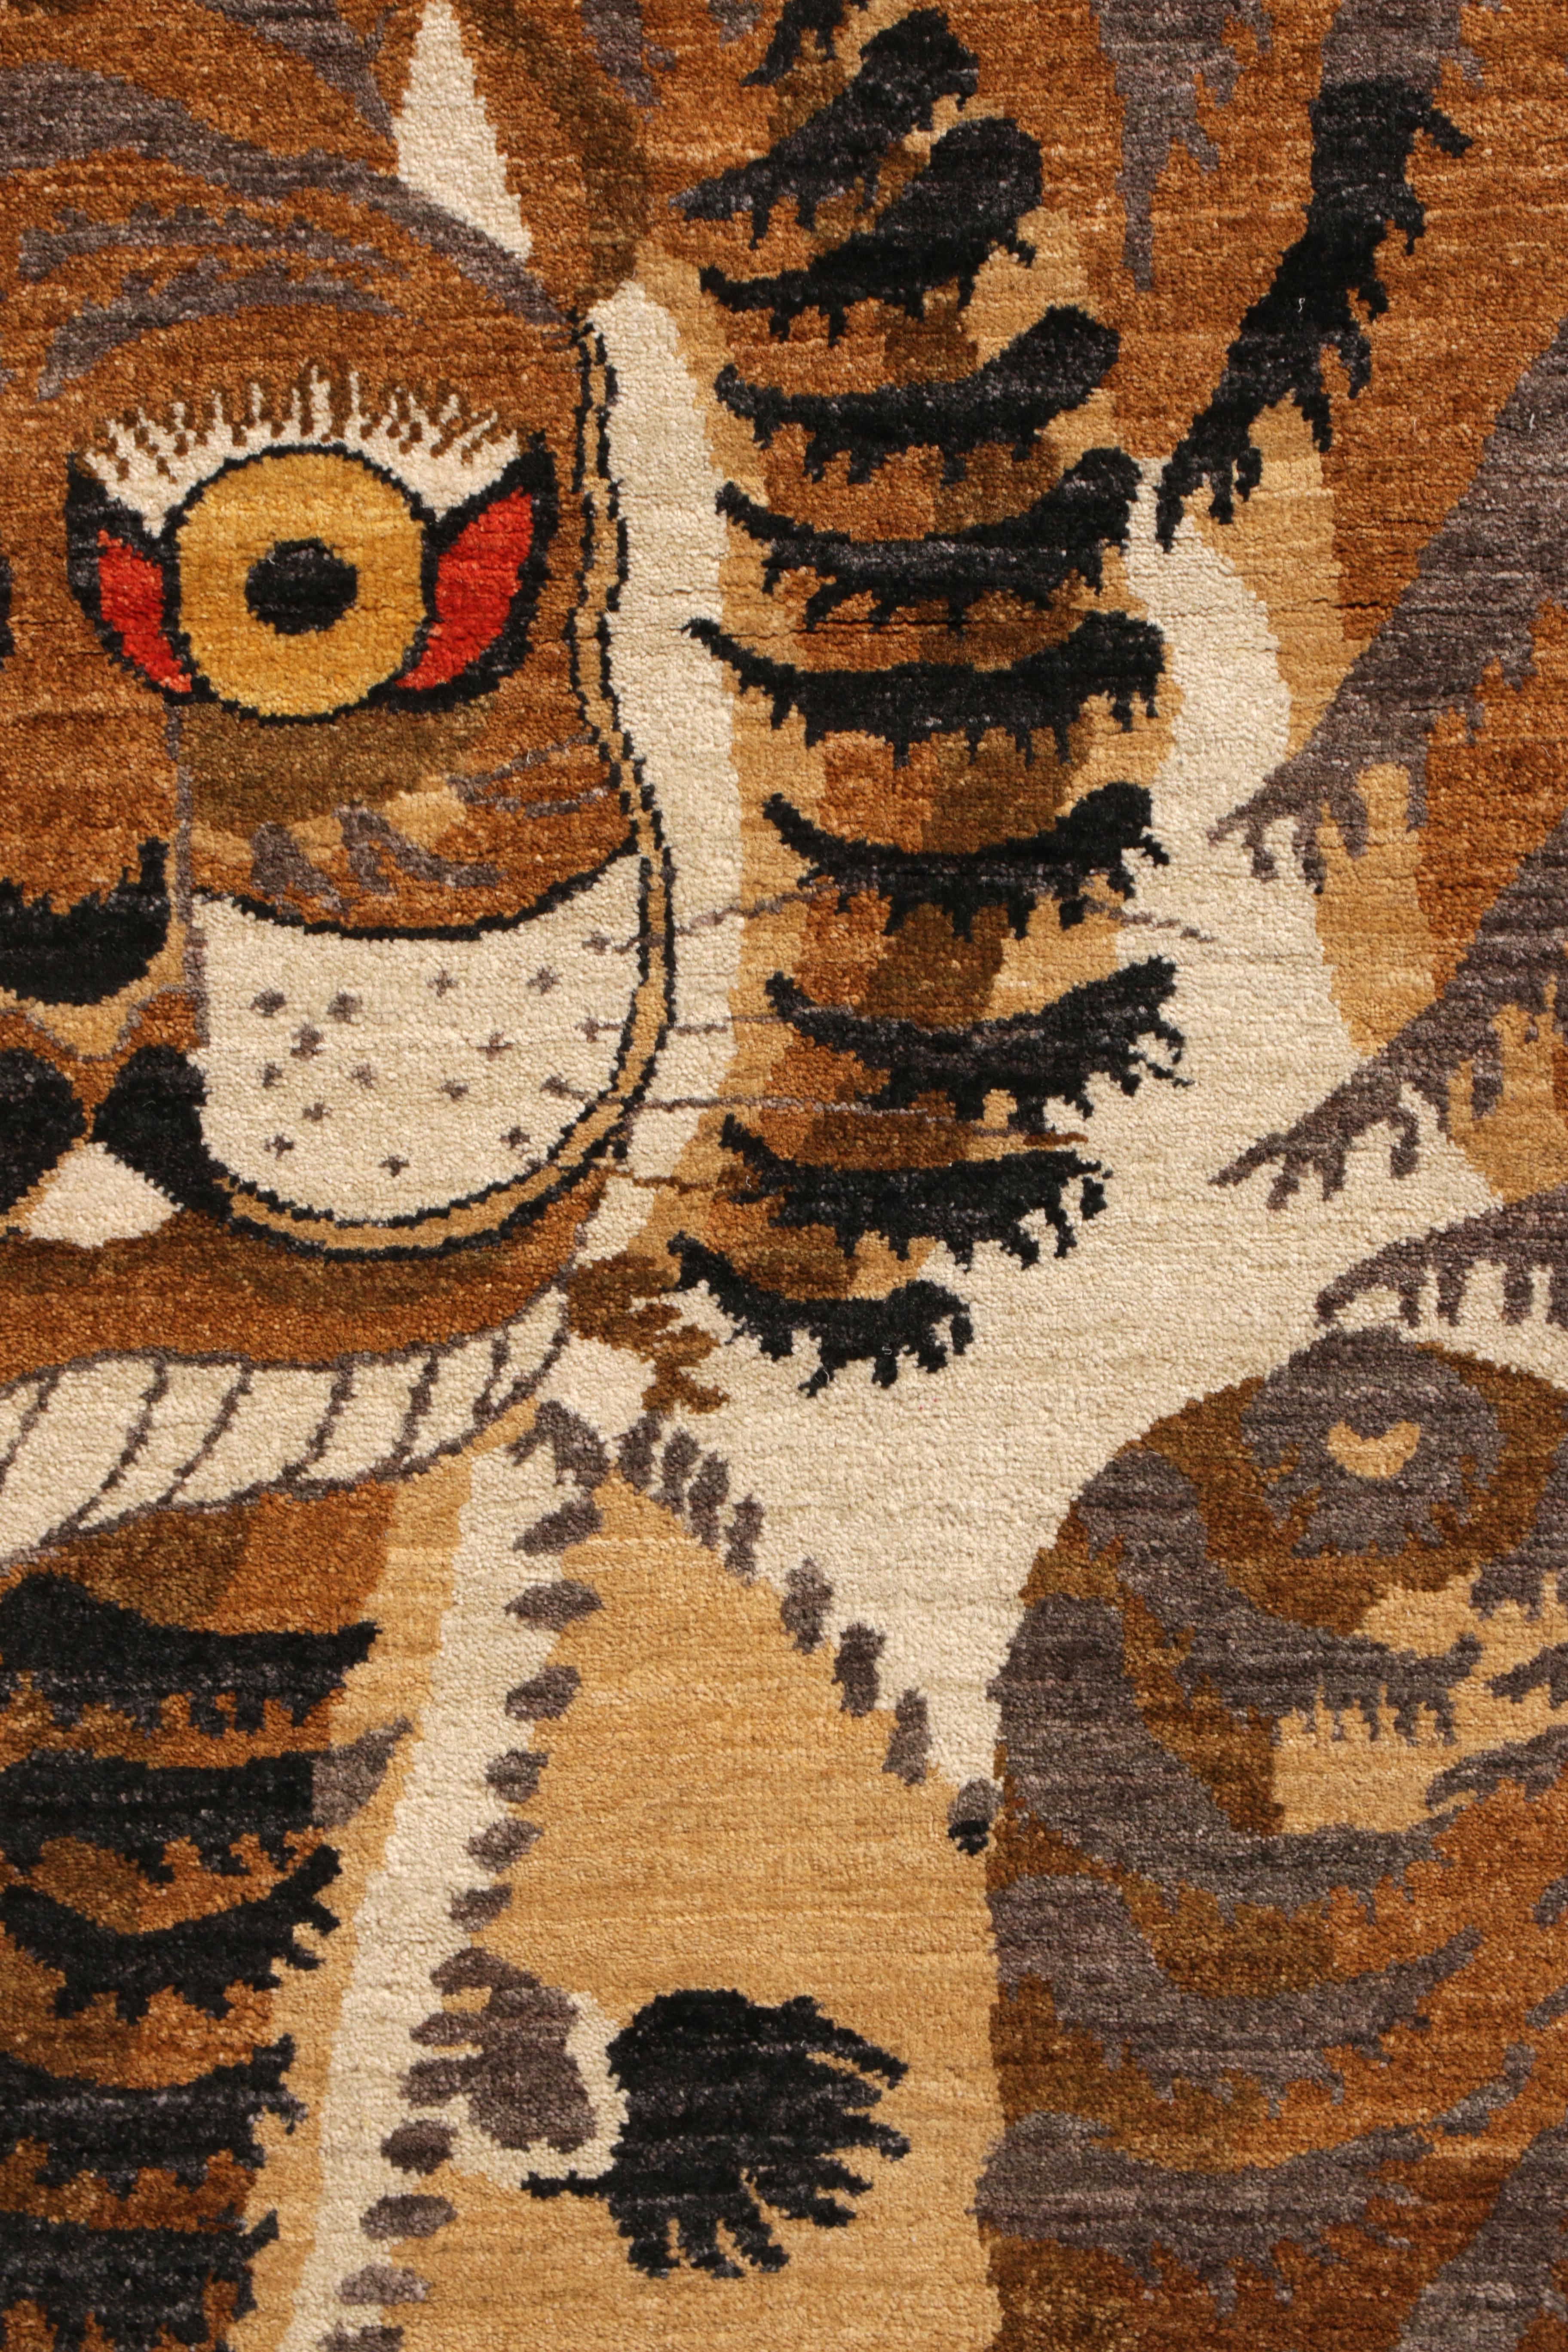 Hand-Knotted Rug & Kilim’s Classic Style Tiger Rug in Orange and Beige-Brown Pictorial For Sale